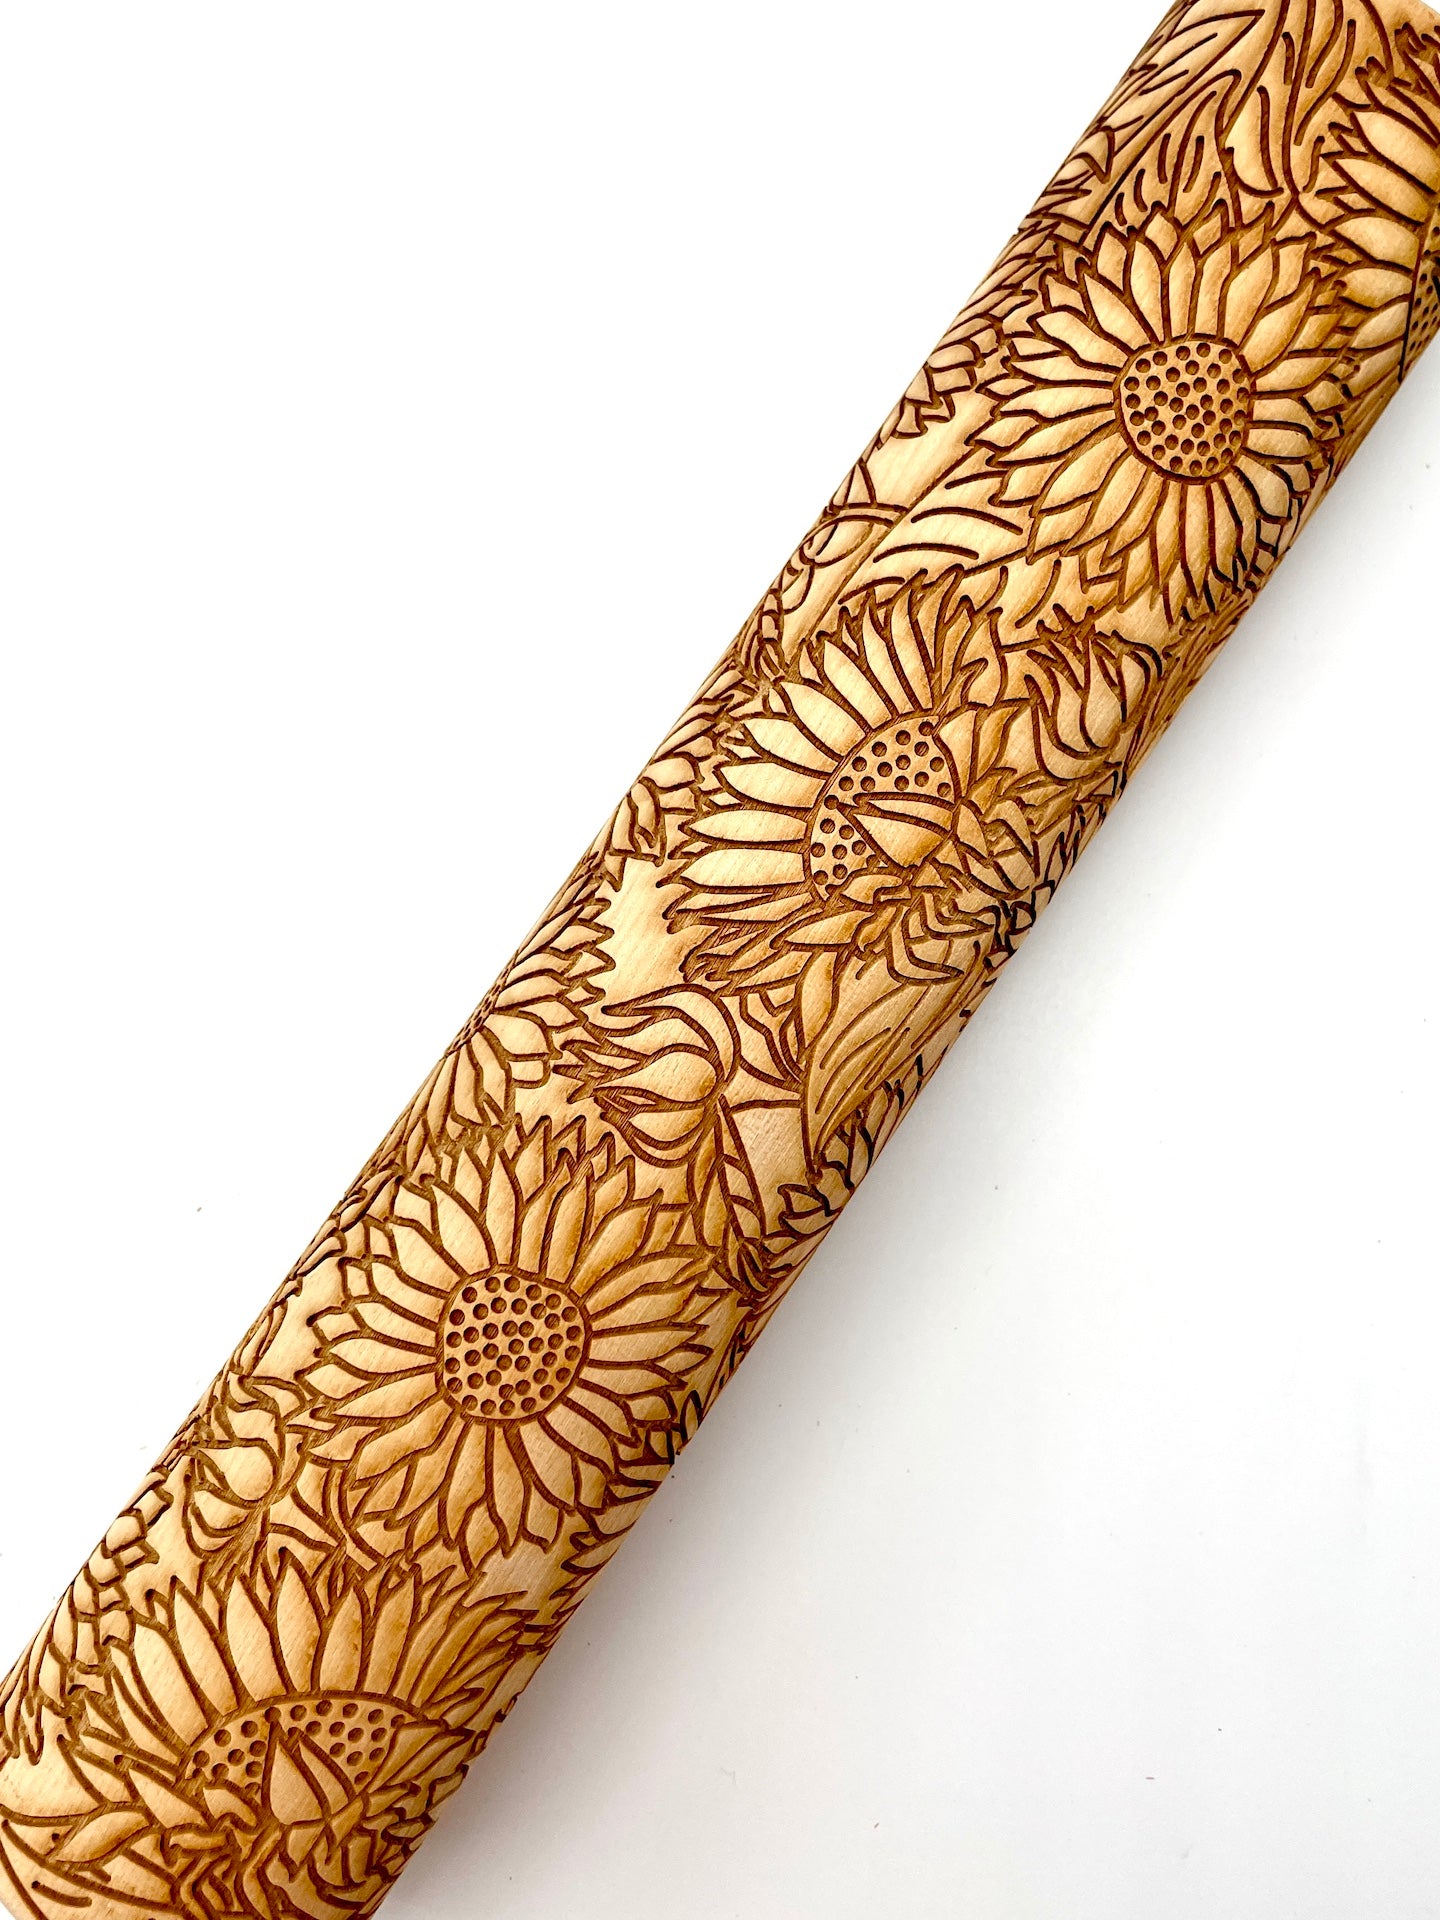 Sunflowers Textured Rolling Pin